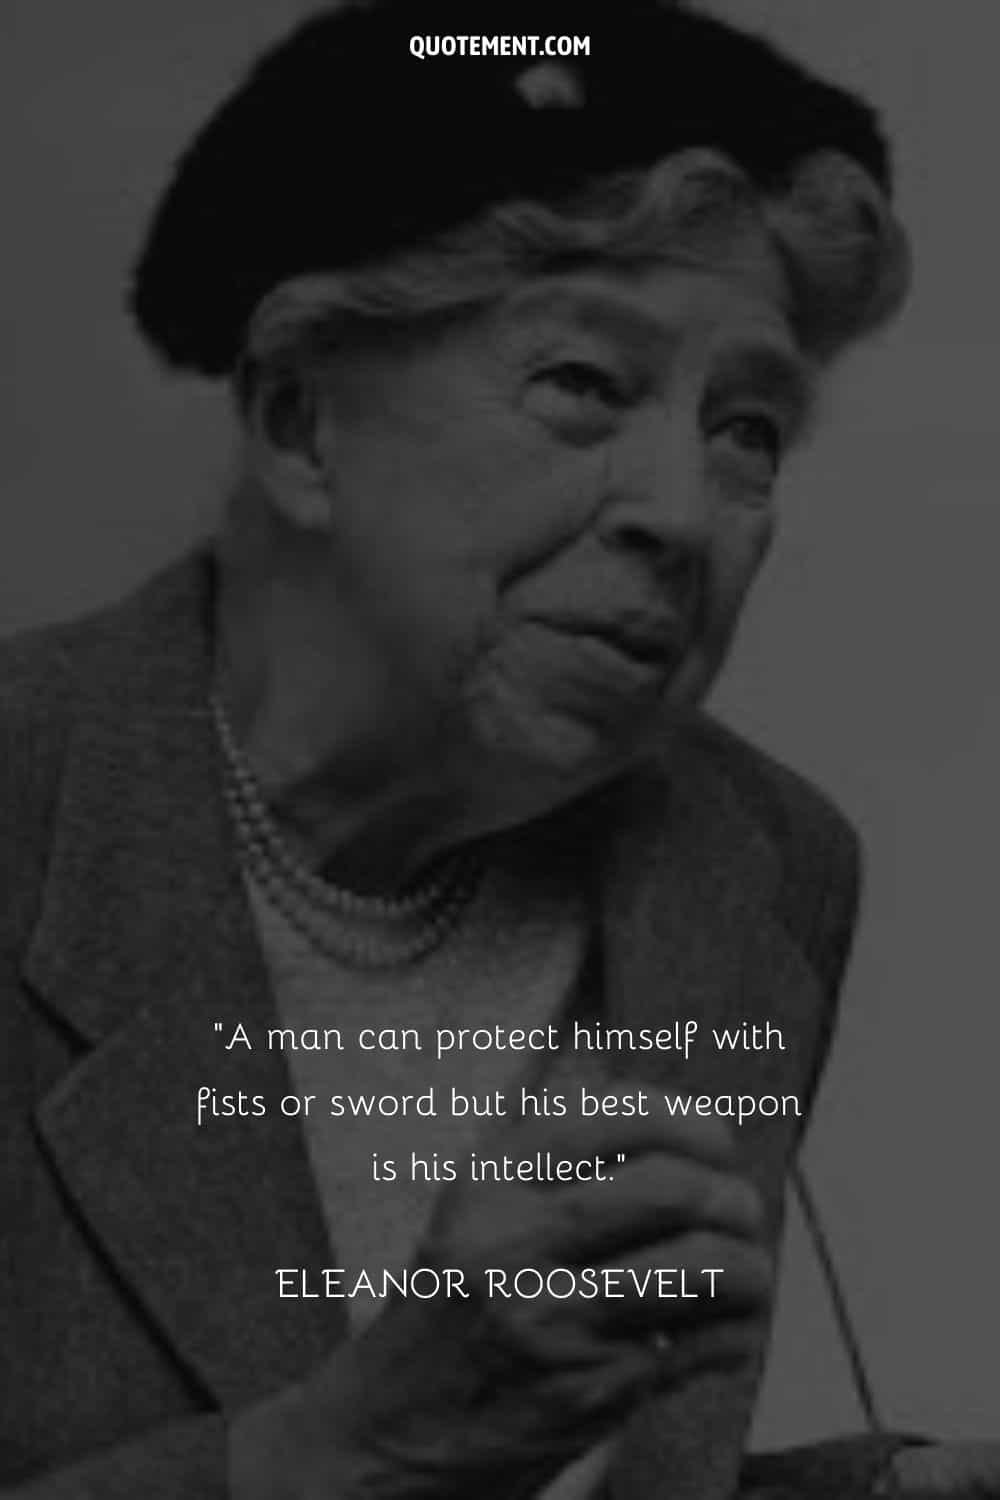 “A man can protect himself with fists or sword but his best weapon is his intellect.” ― Eleanor Roosevelt